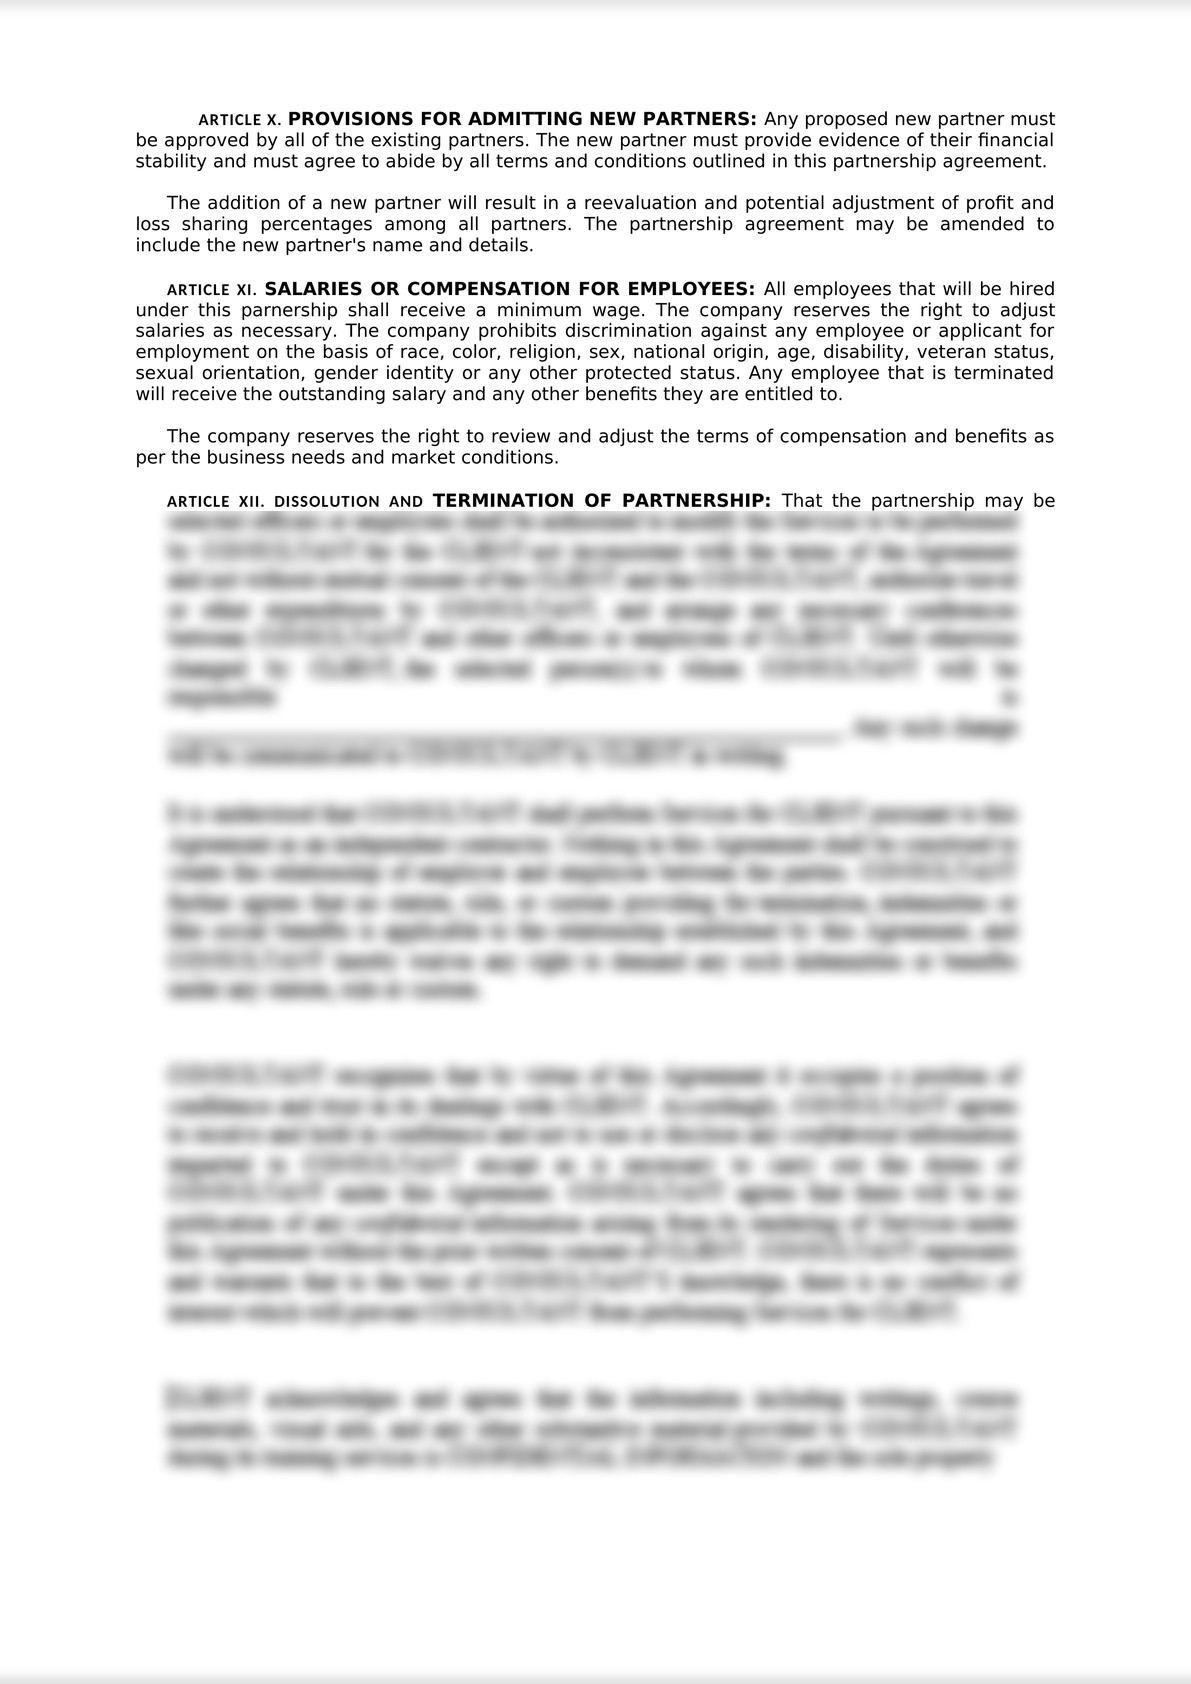 Articles of General Partnership (Agreement Contract)-2